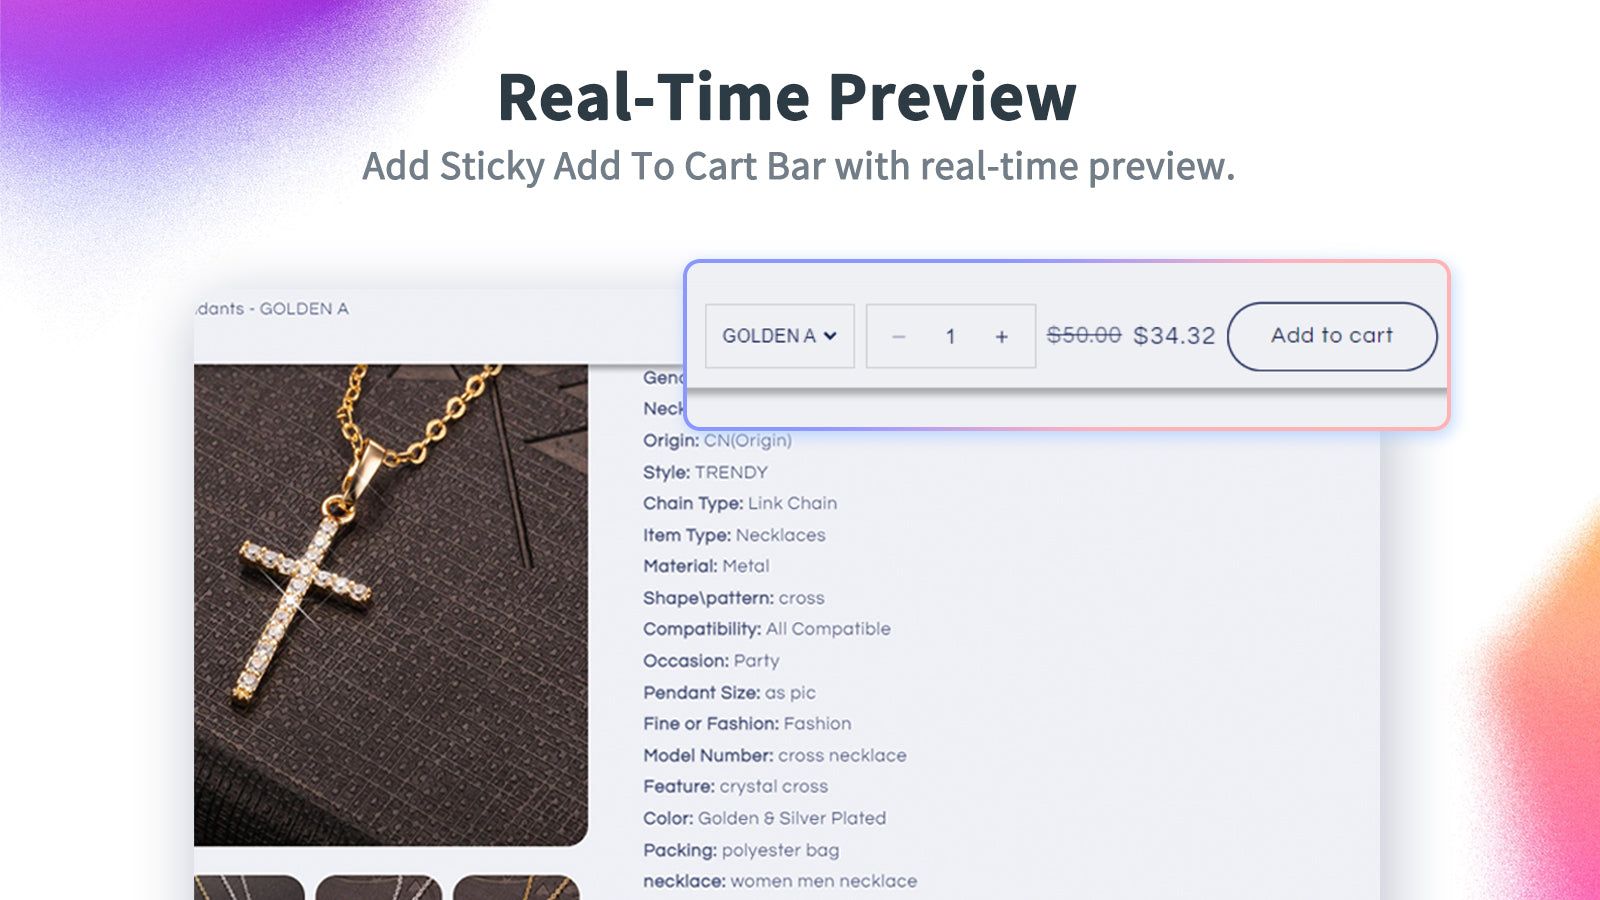 Add Sticky Add To Cart Bar with real-time preview